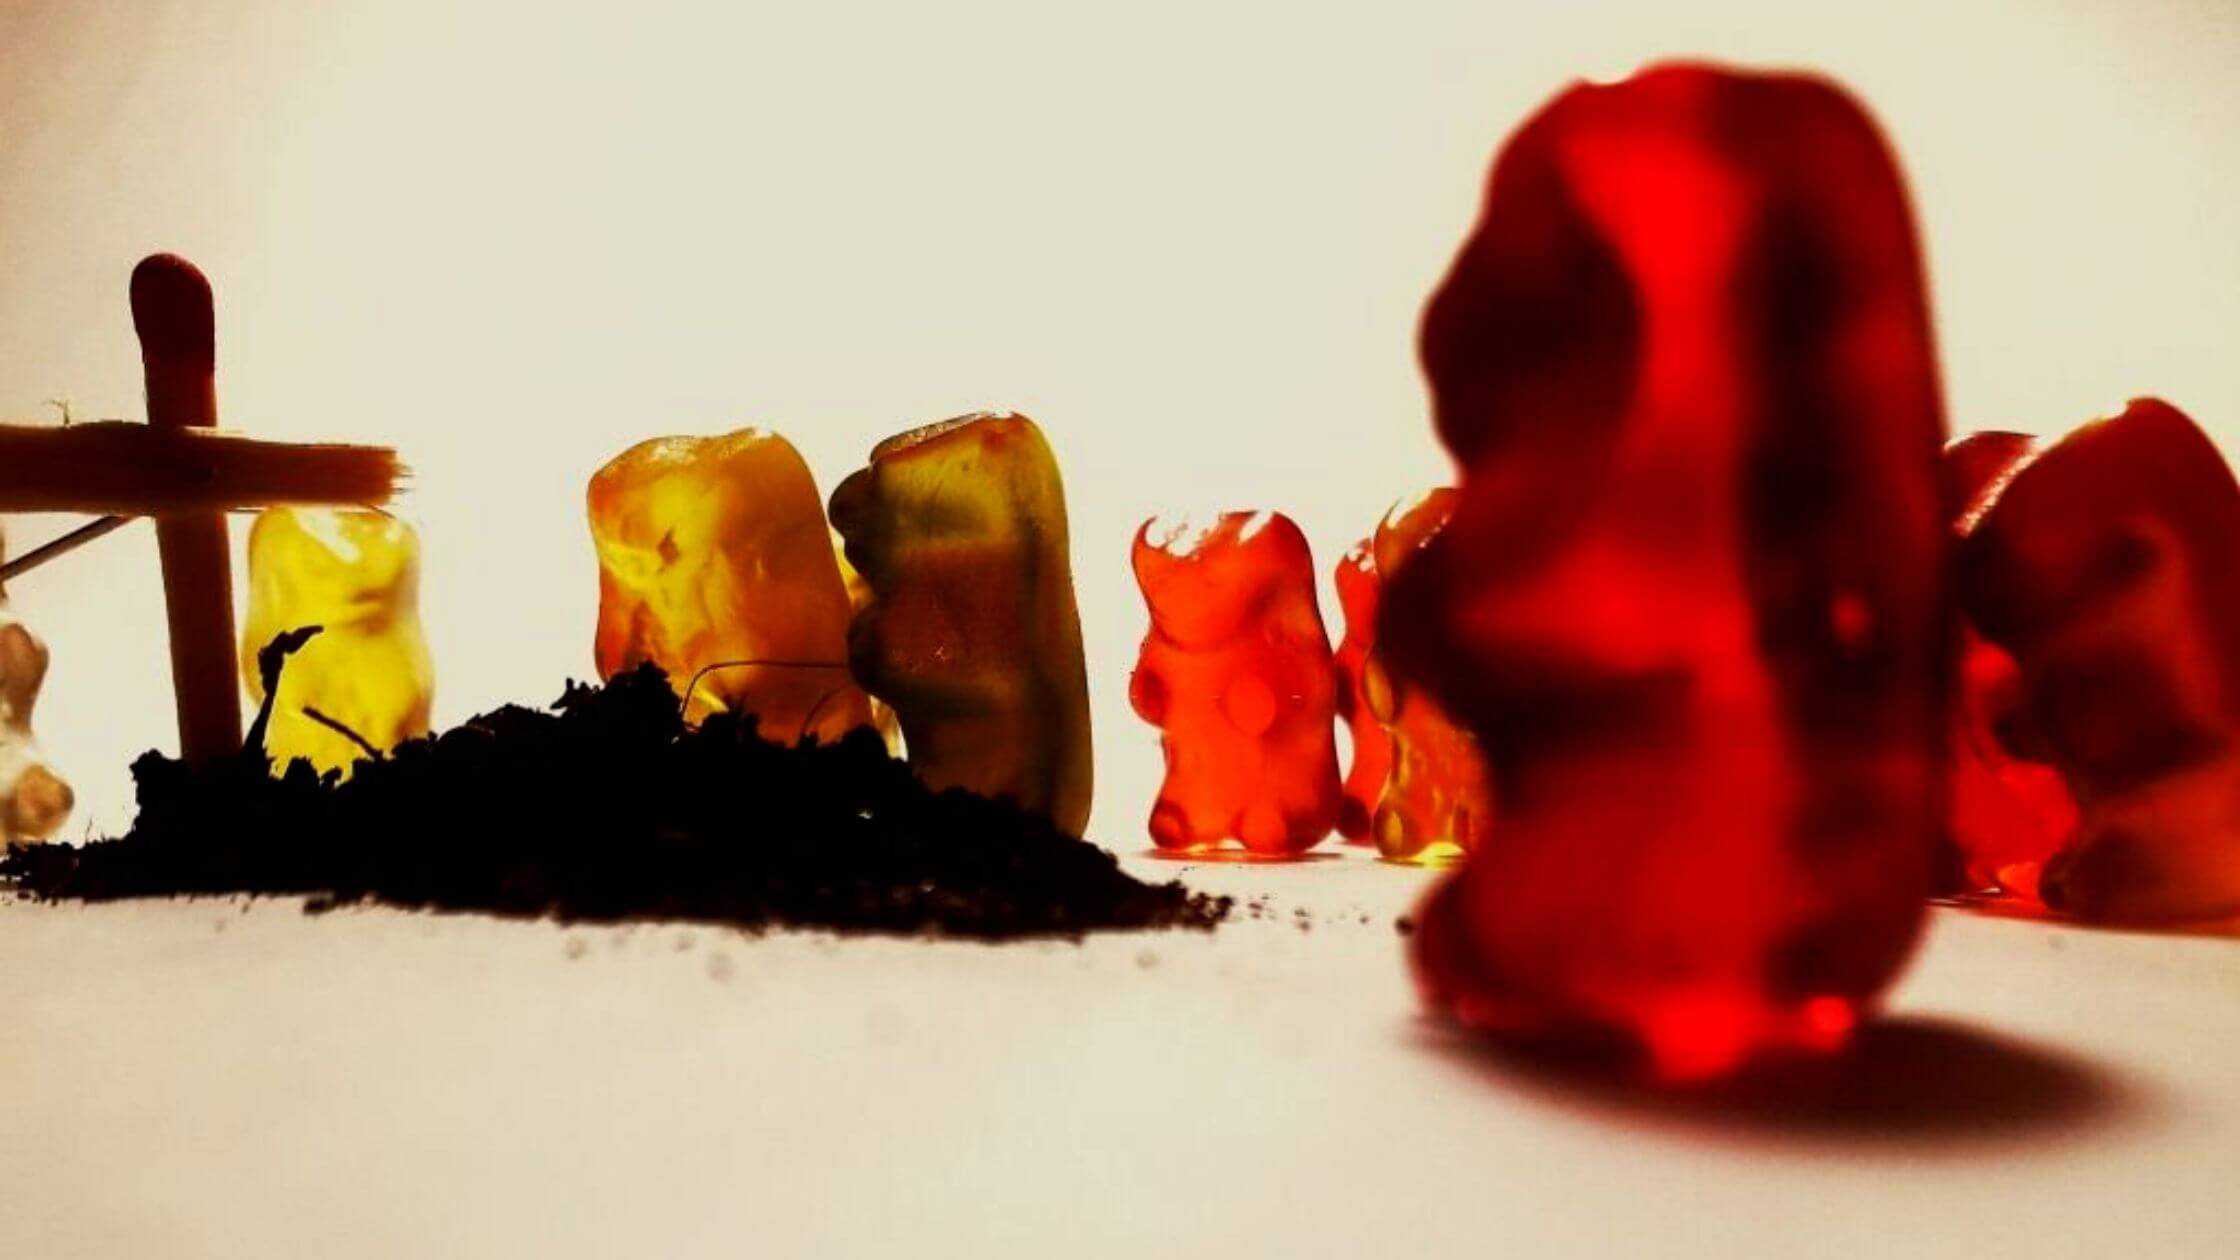 State Of Minnesota Files Suit To Ban 'Death By Gummy Bears' THC Edibles